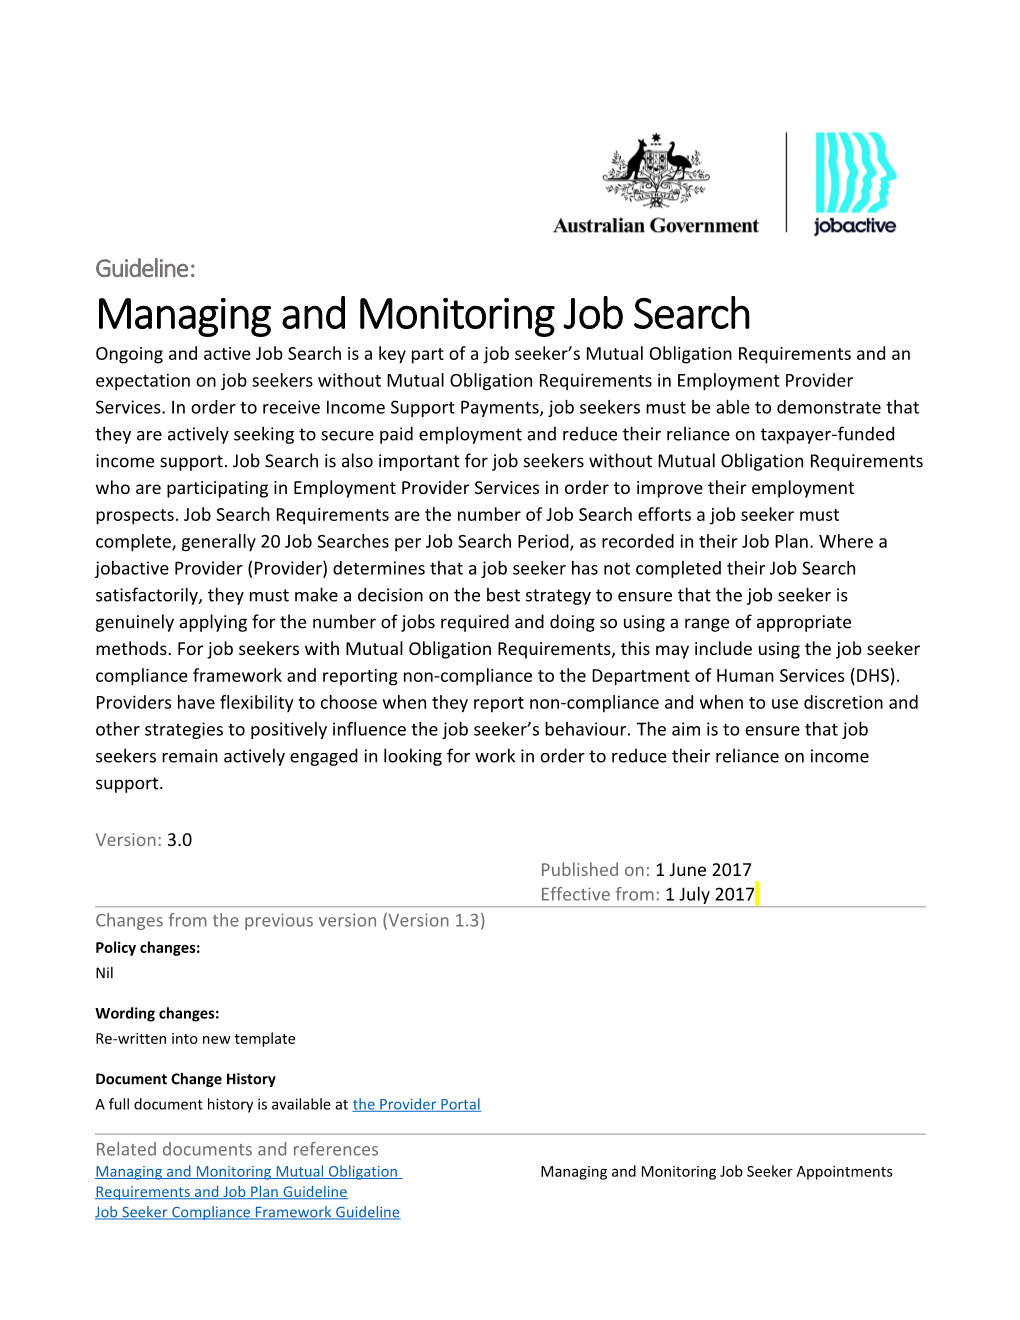 Guideline: Managing and Monitoring Job Search